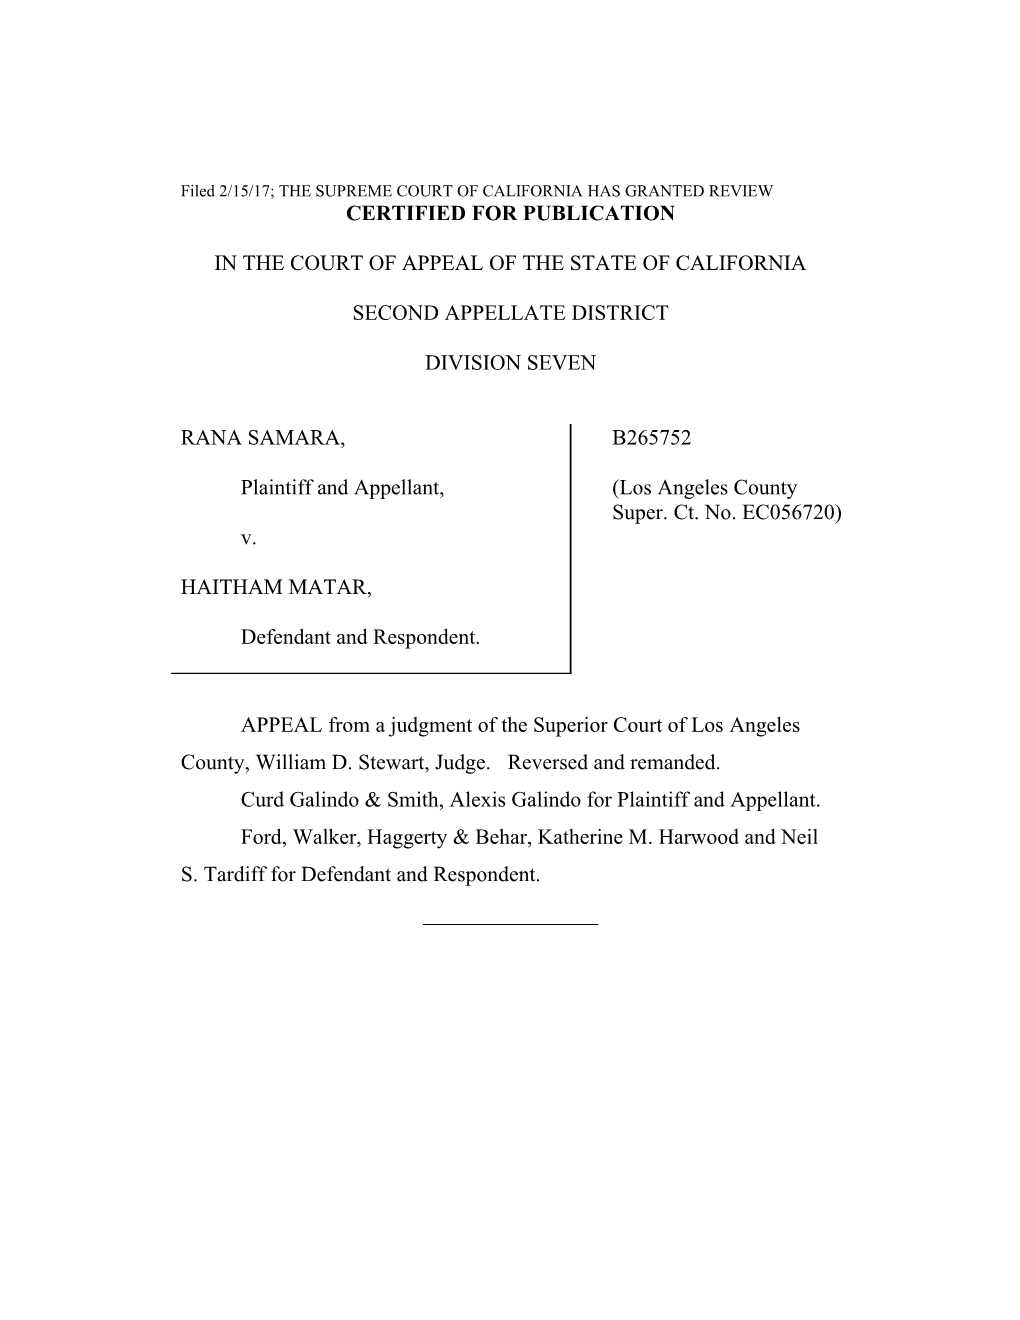 Filed 2/15/17; the SUPREME COURT of CALIFORNIA HAS GRANTED REVIEW